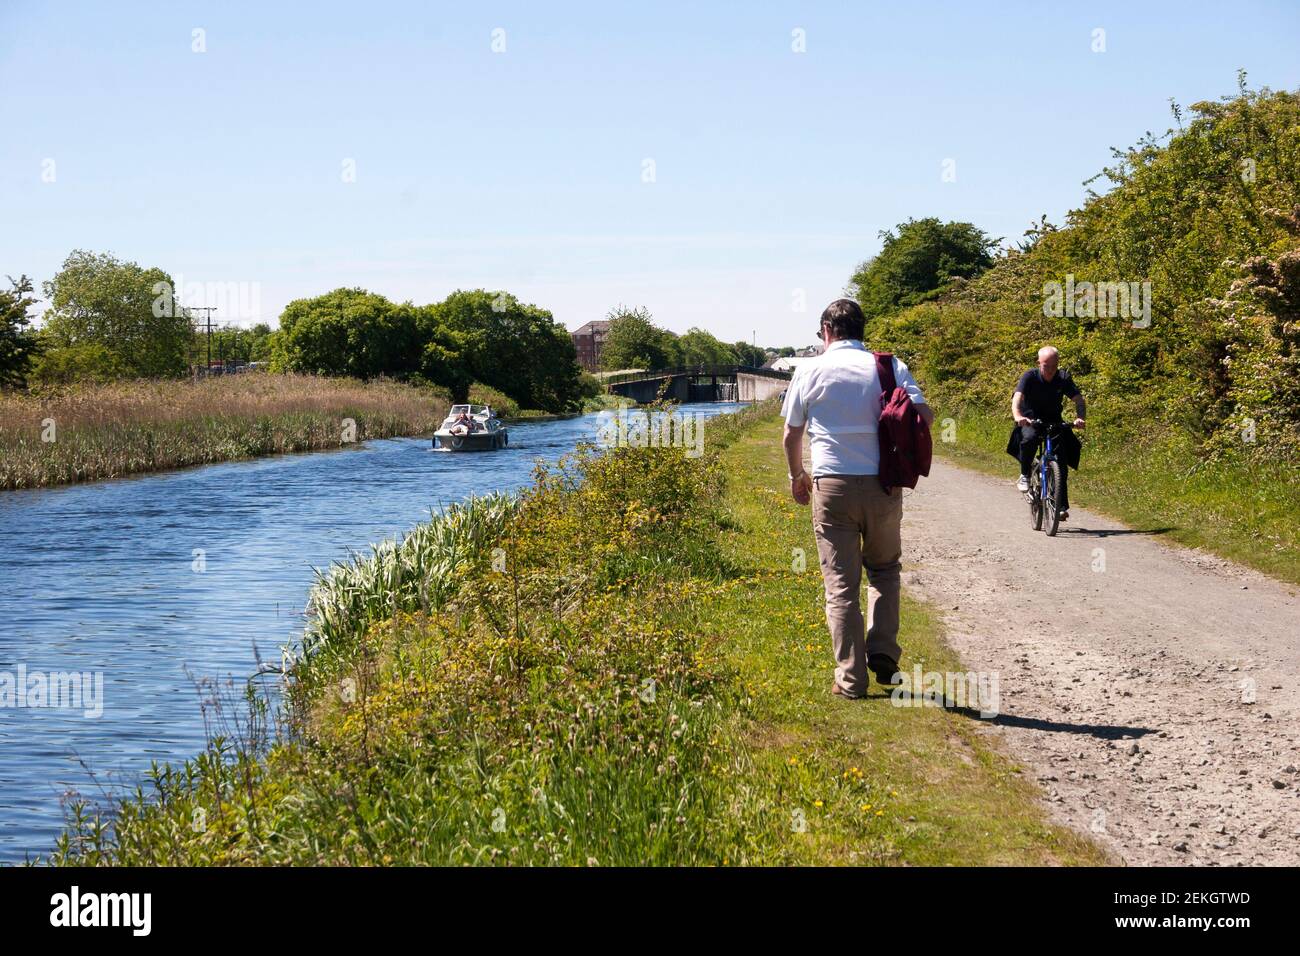 Forth and Clyde Canal nr Falkirk with people on the towpath and small boat. Stock Photo